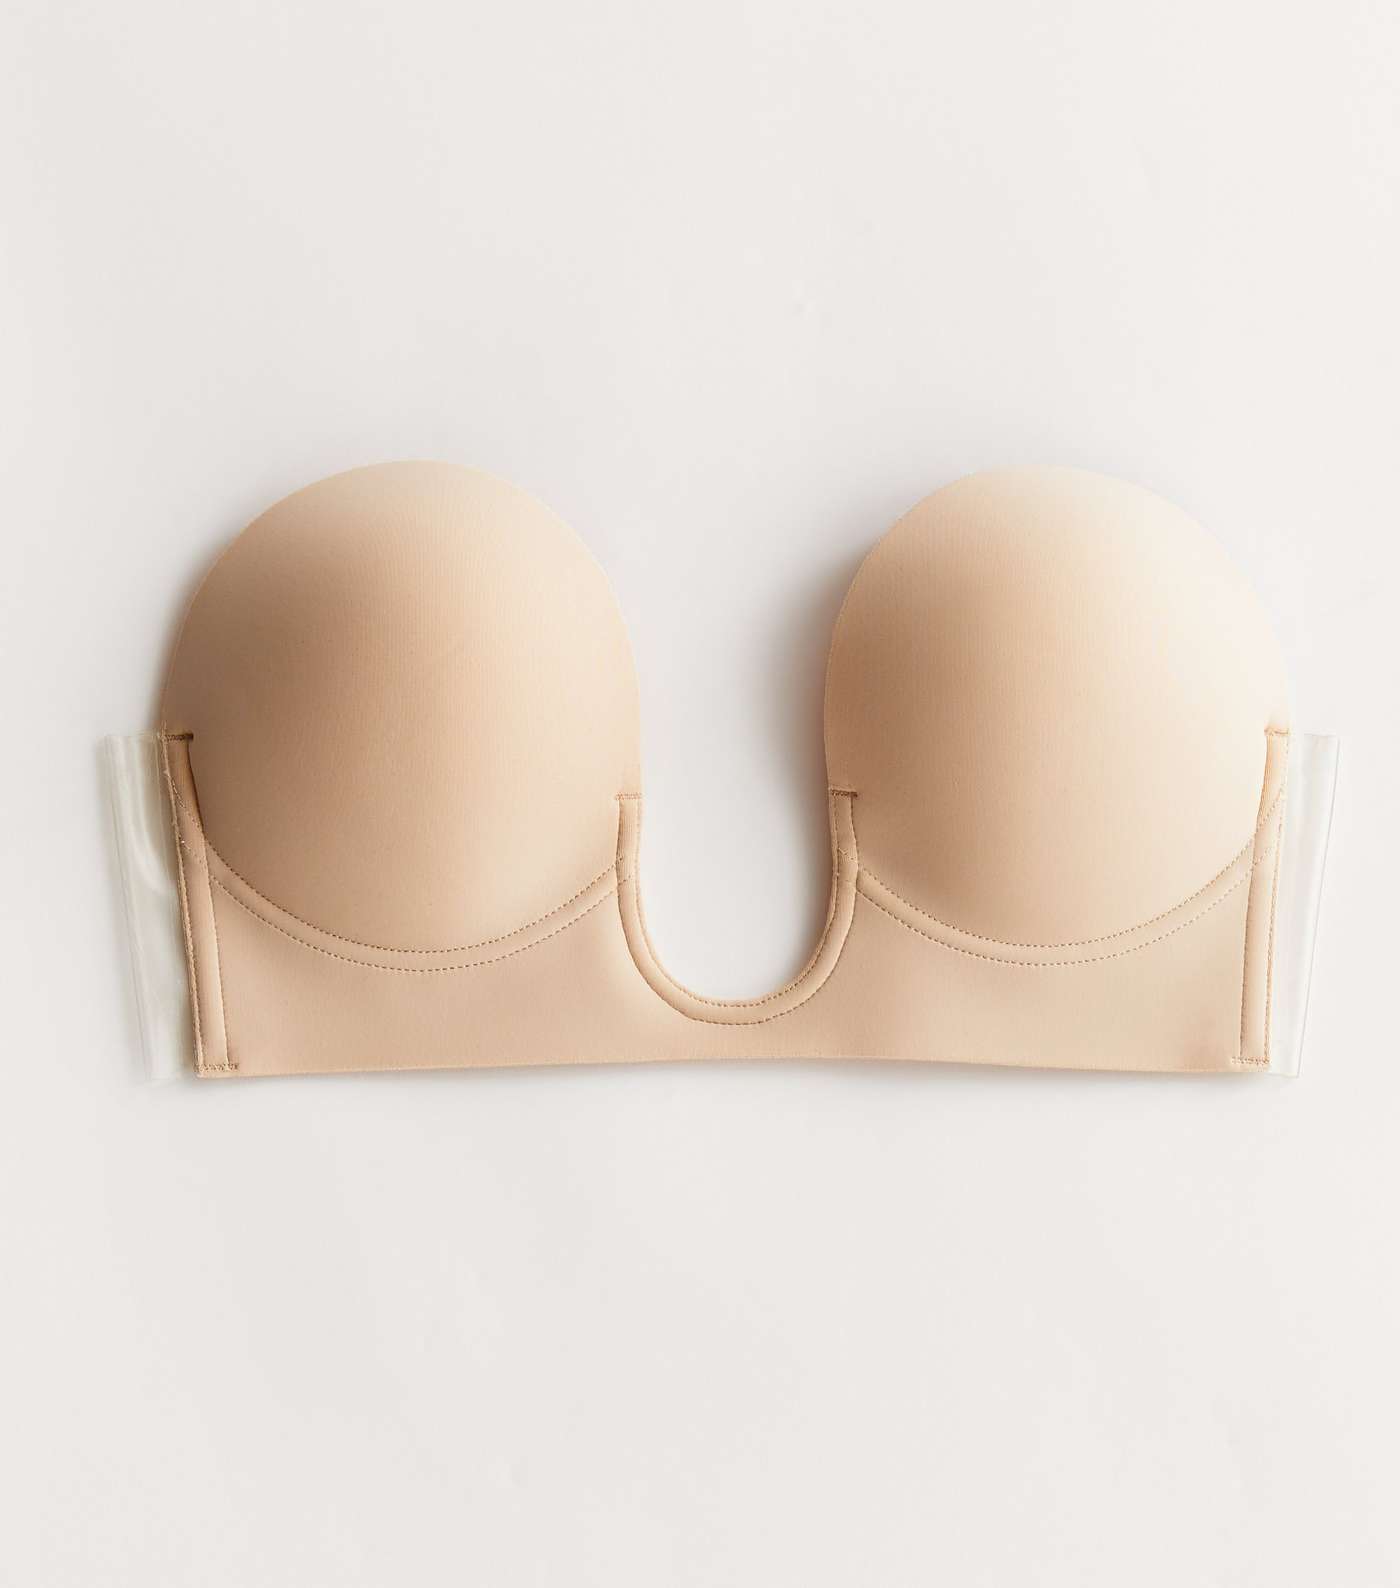 Perfection Beauty Tan D Cup Plunge Stick On Bra Image 5